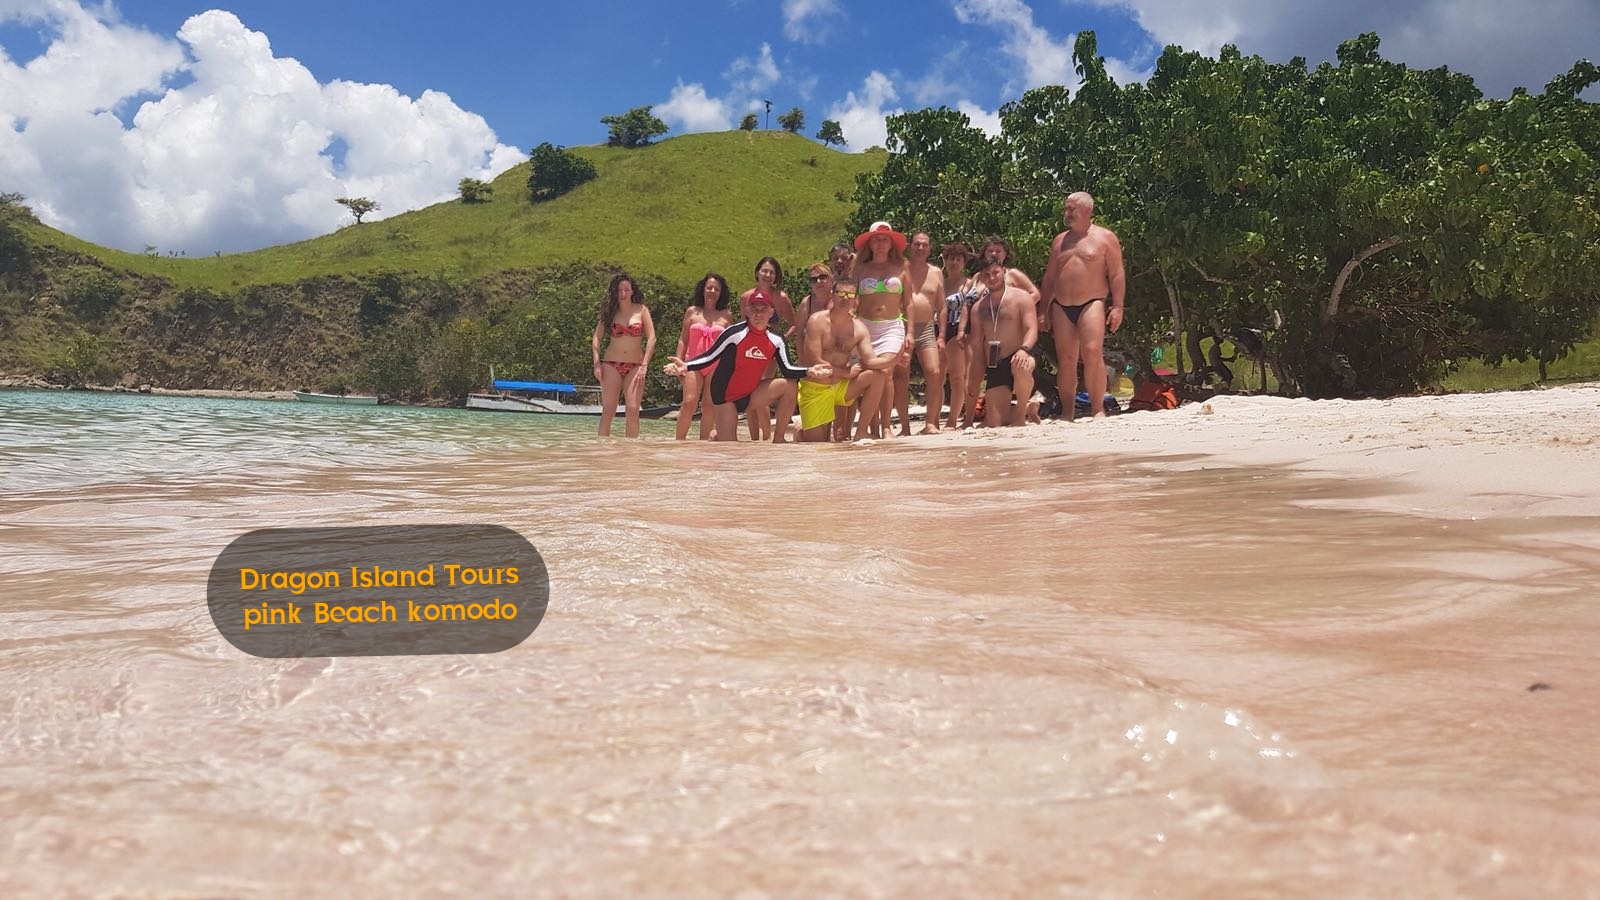 Our Tour Group at Pink Beach